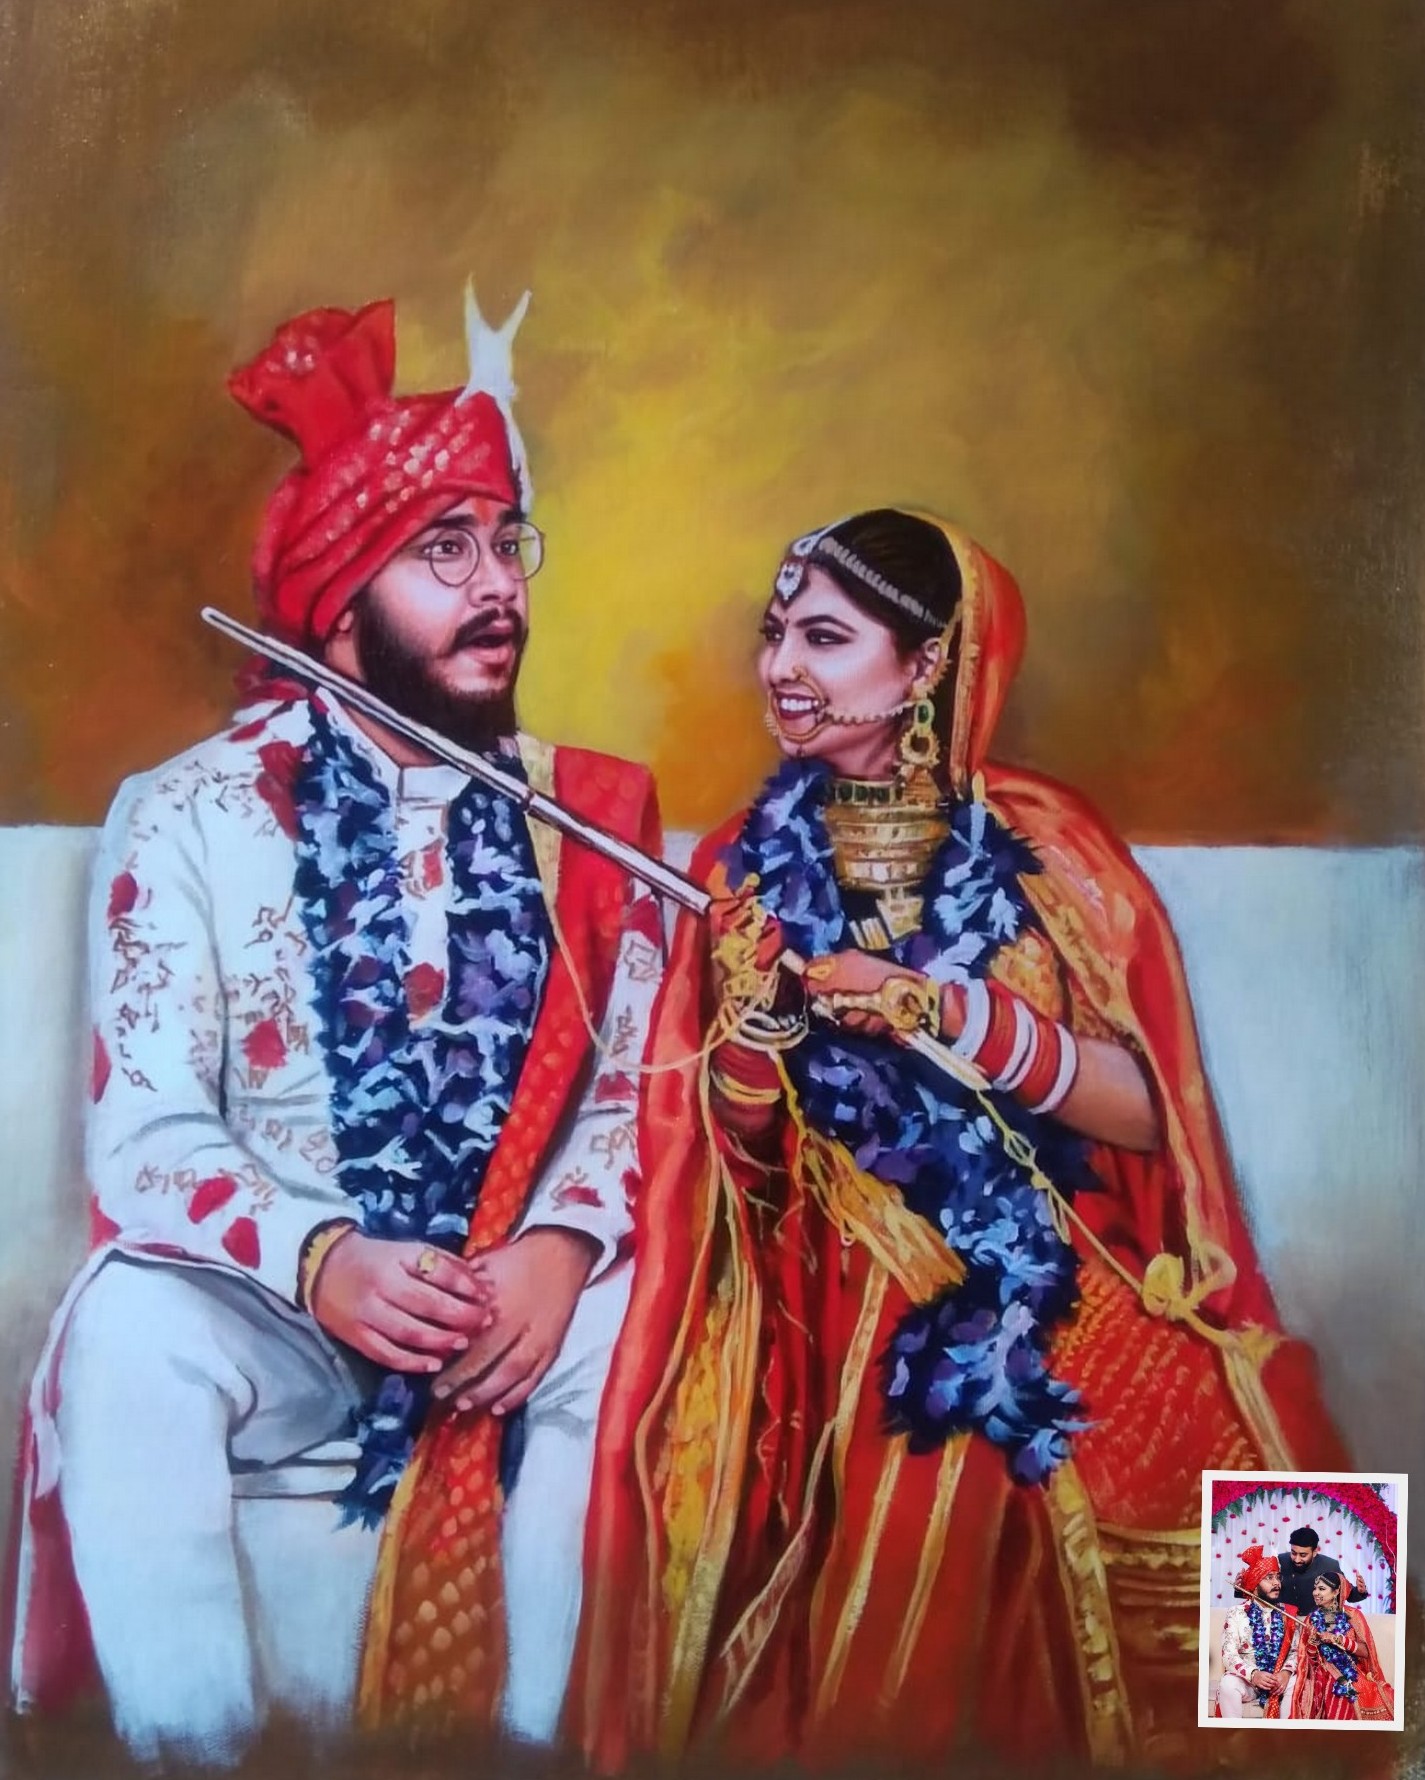 A playful Indian couple portrait  in wedding dress, wedding portrait painting, anniversary gift 